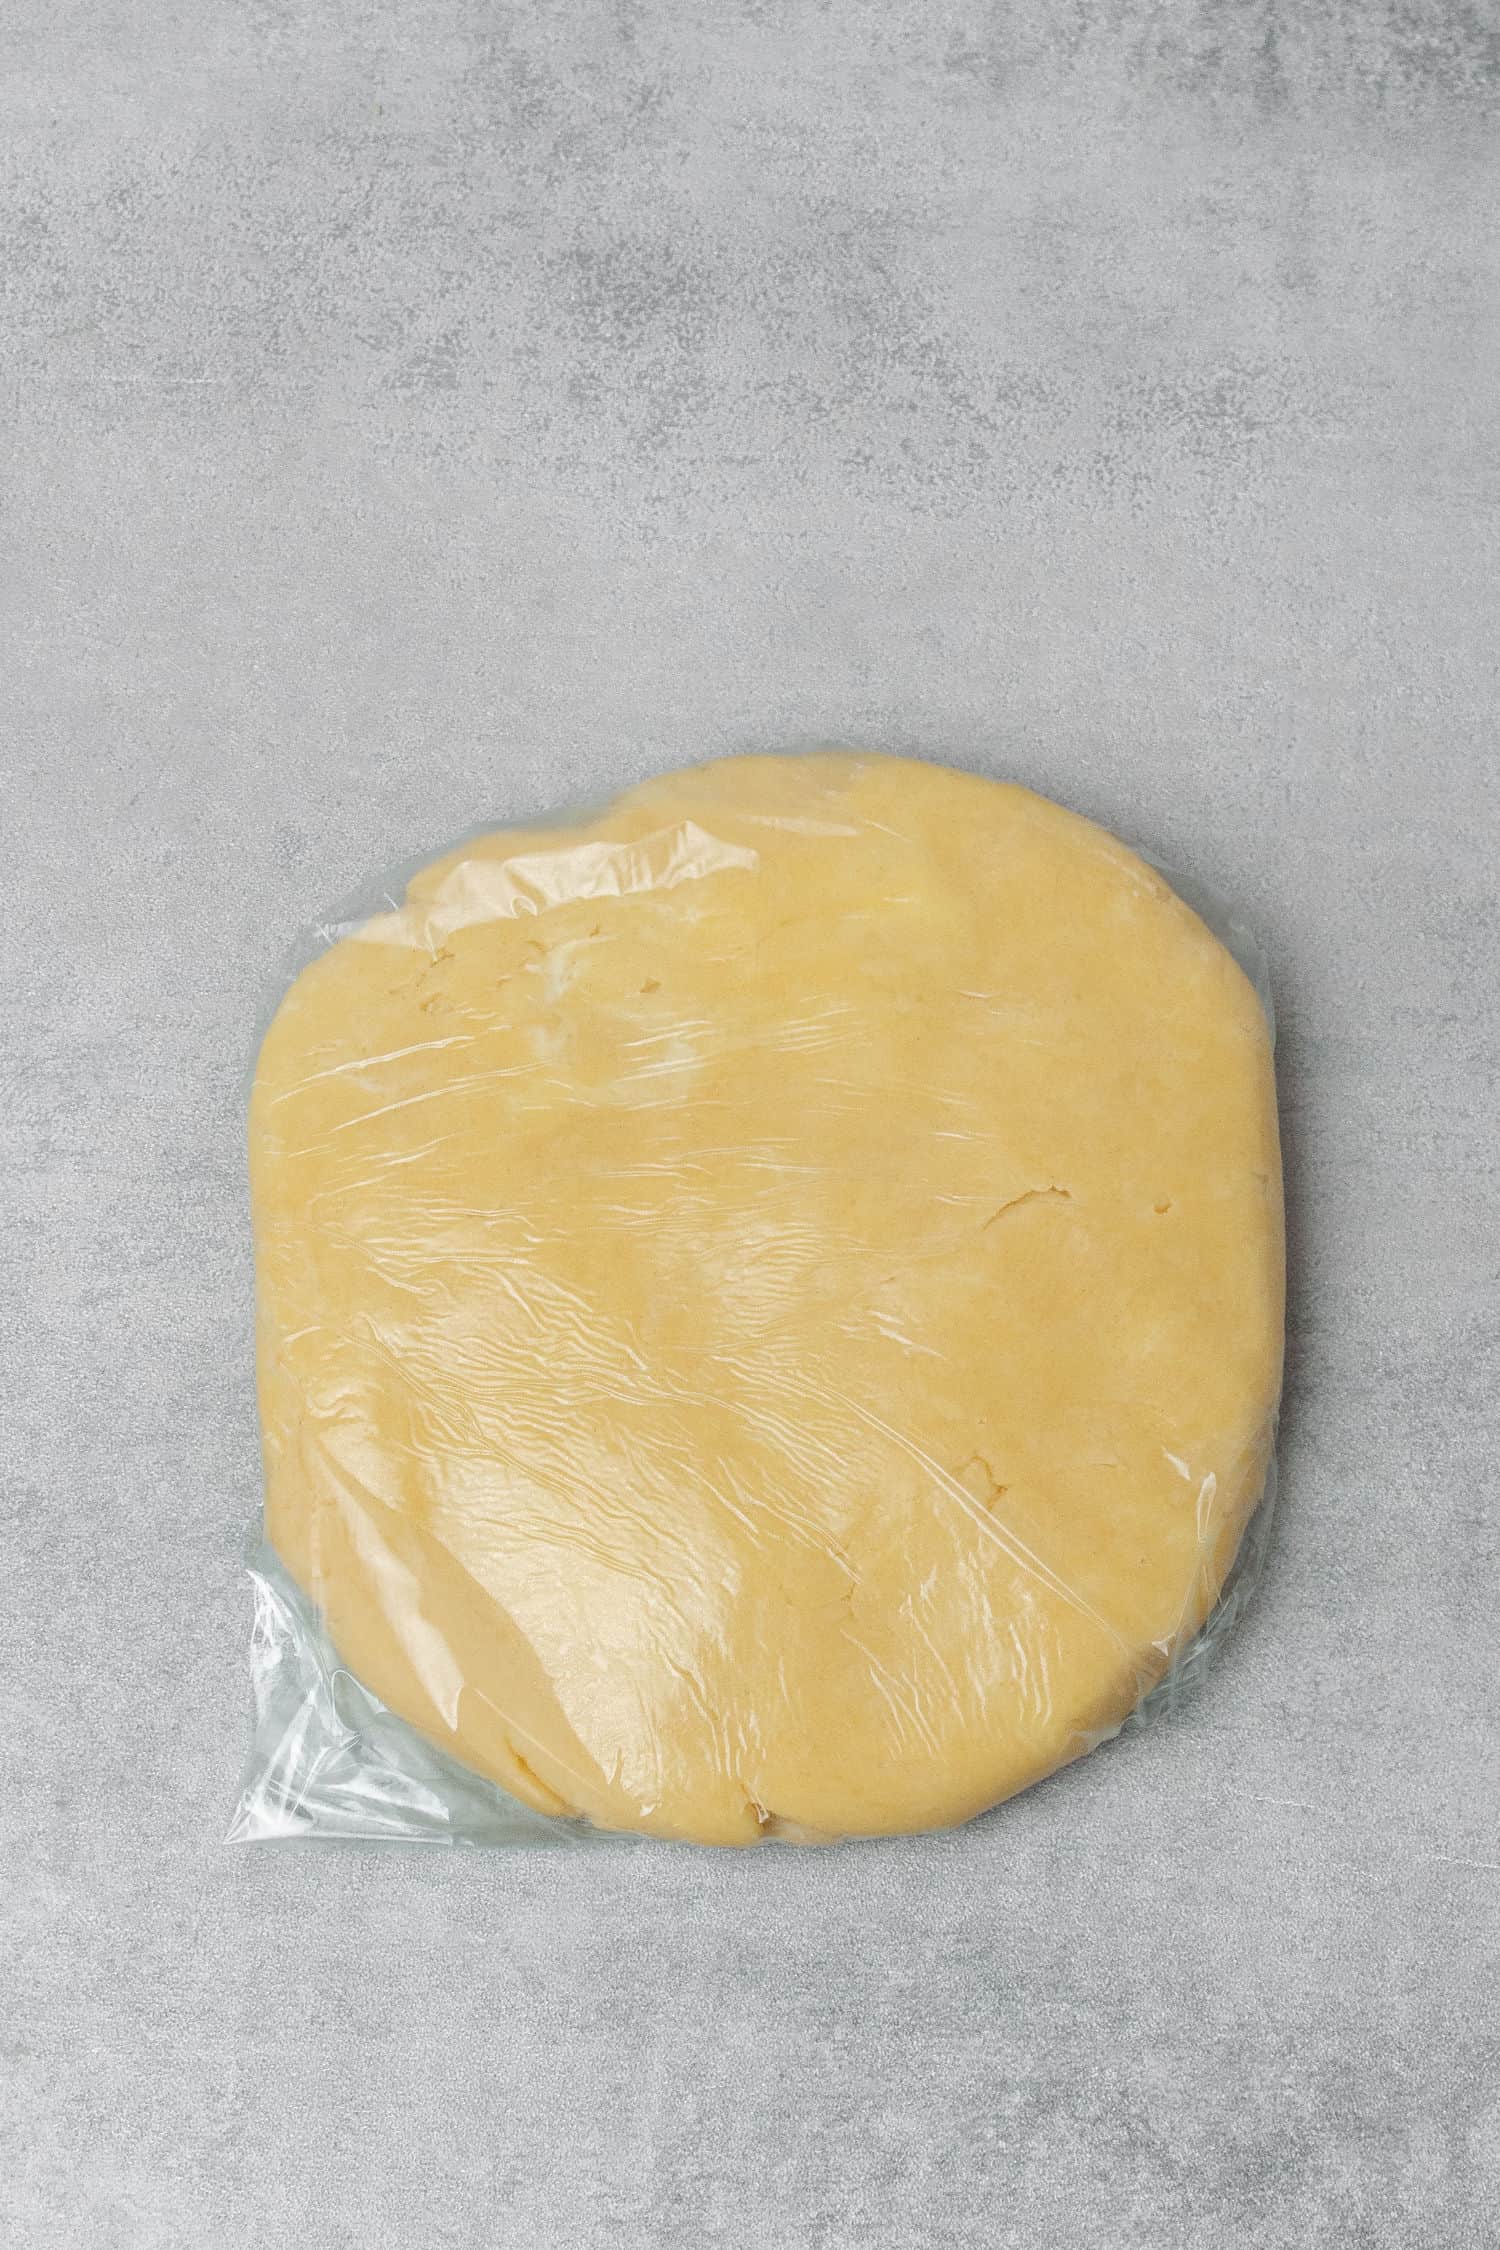 Galette dough wrapped with plastic foil.